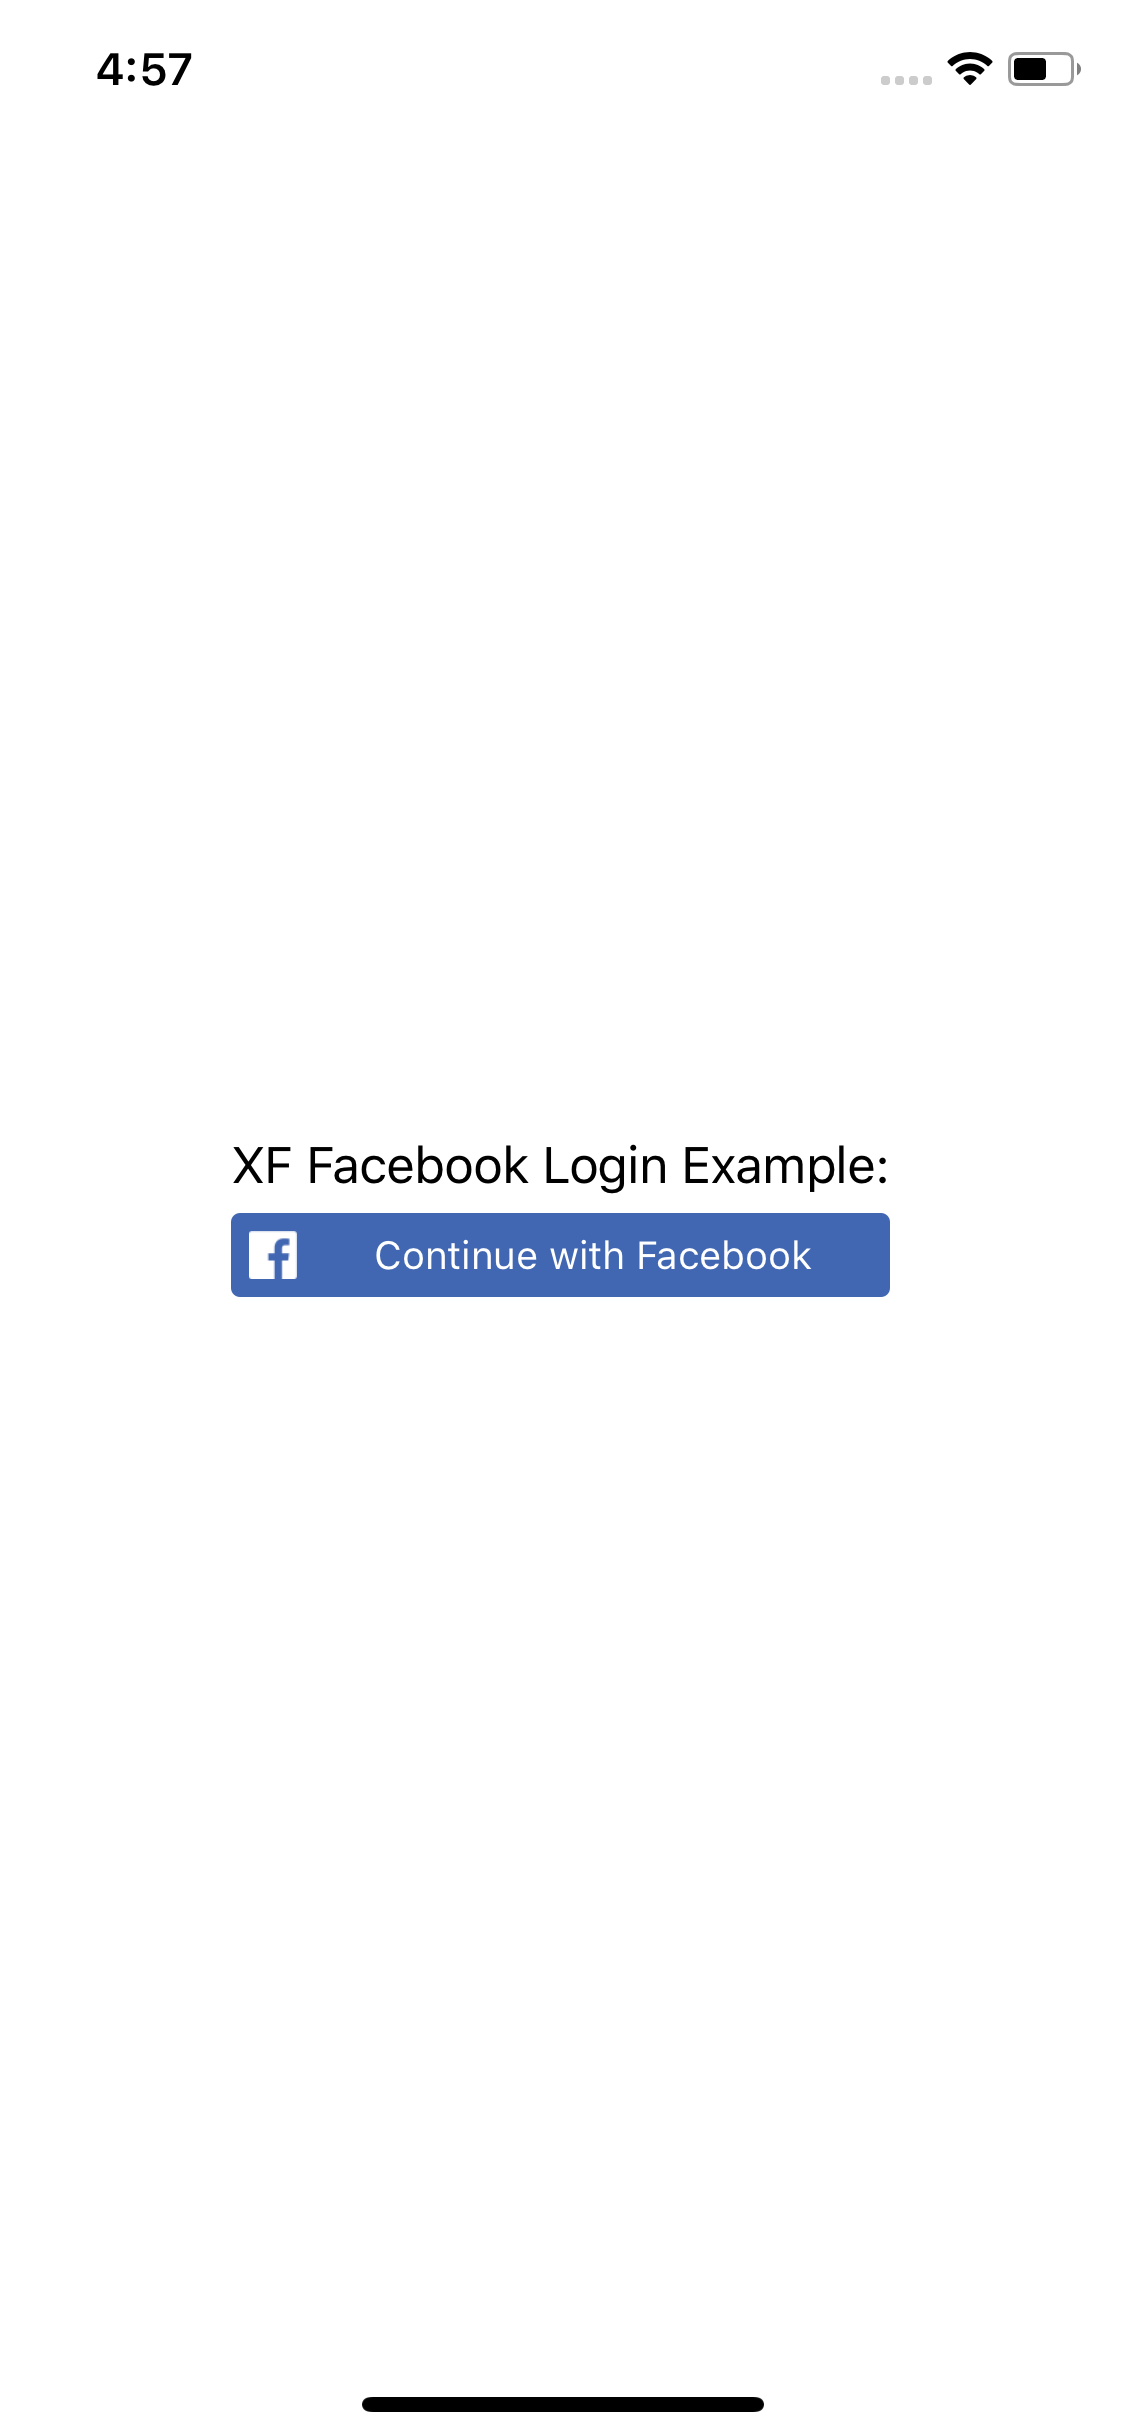 Xamarin.Android can't create Facebook login button - Stack Overflow